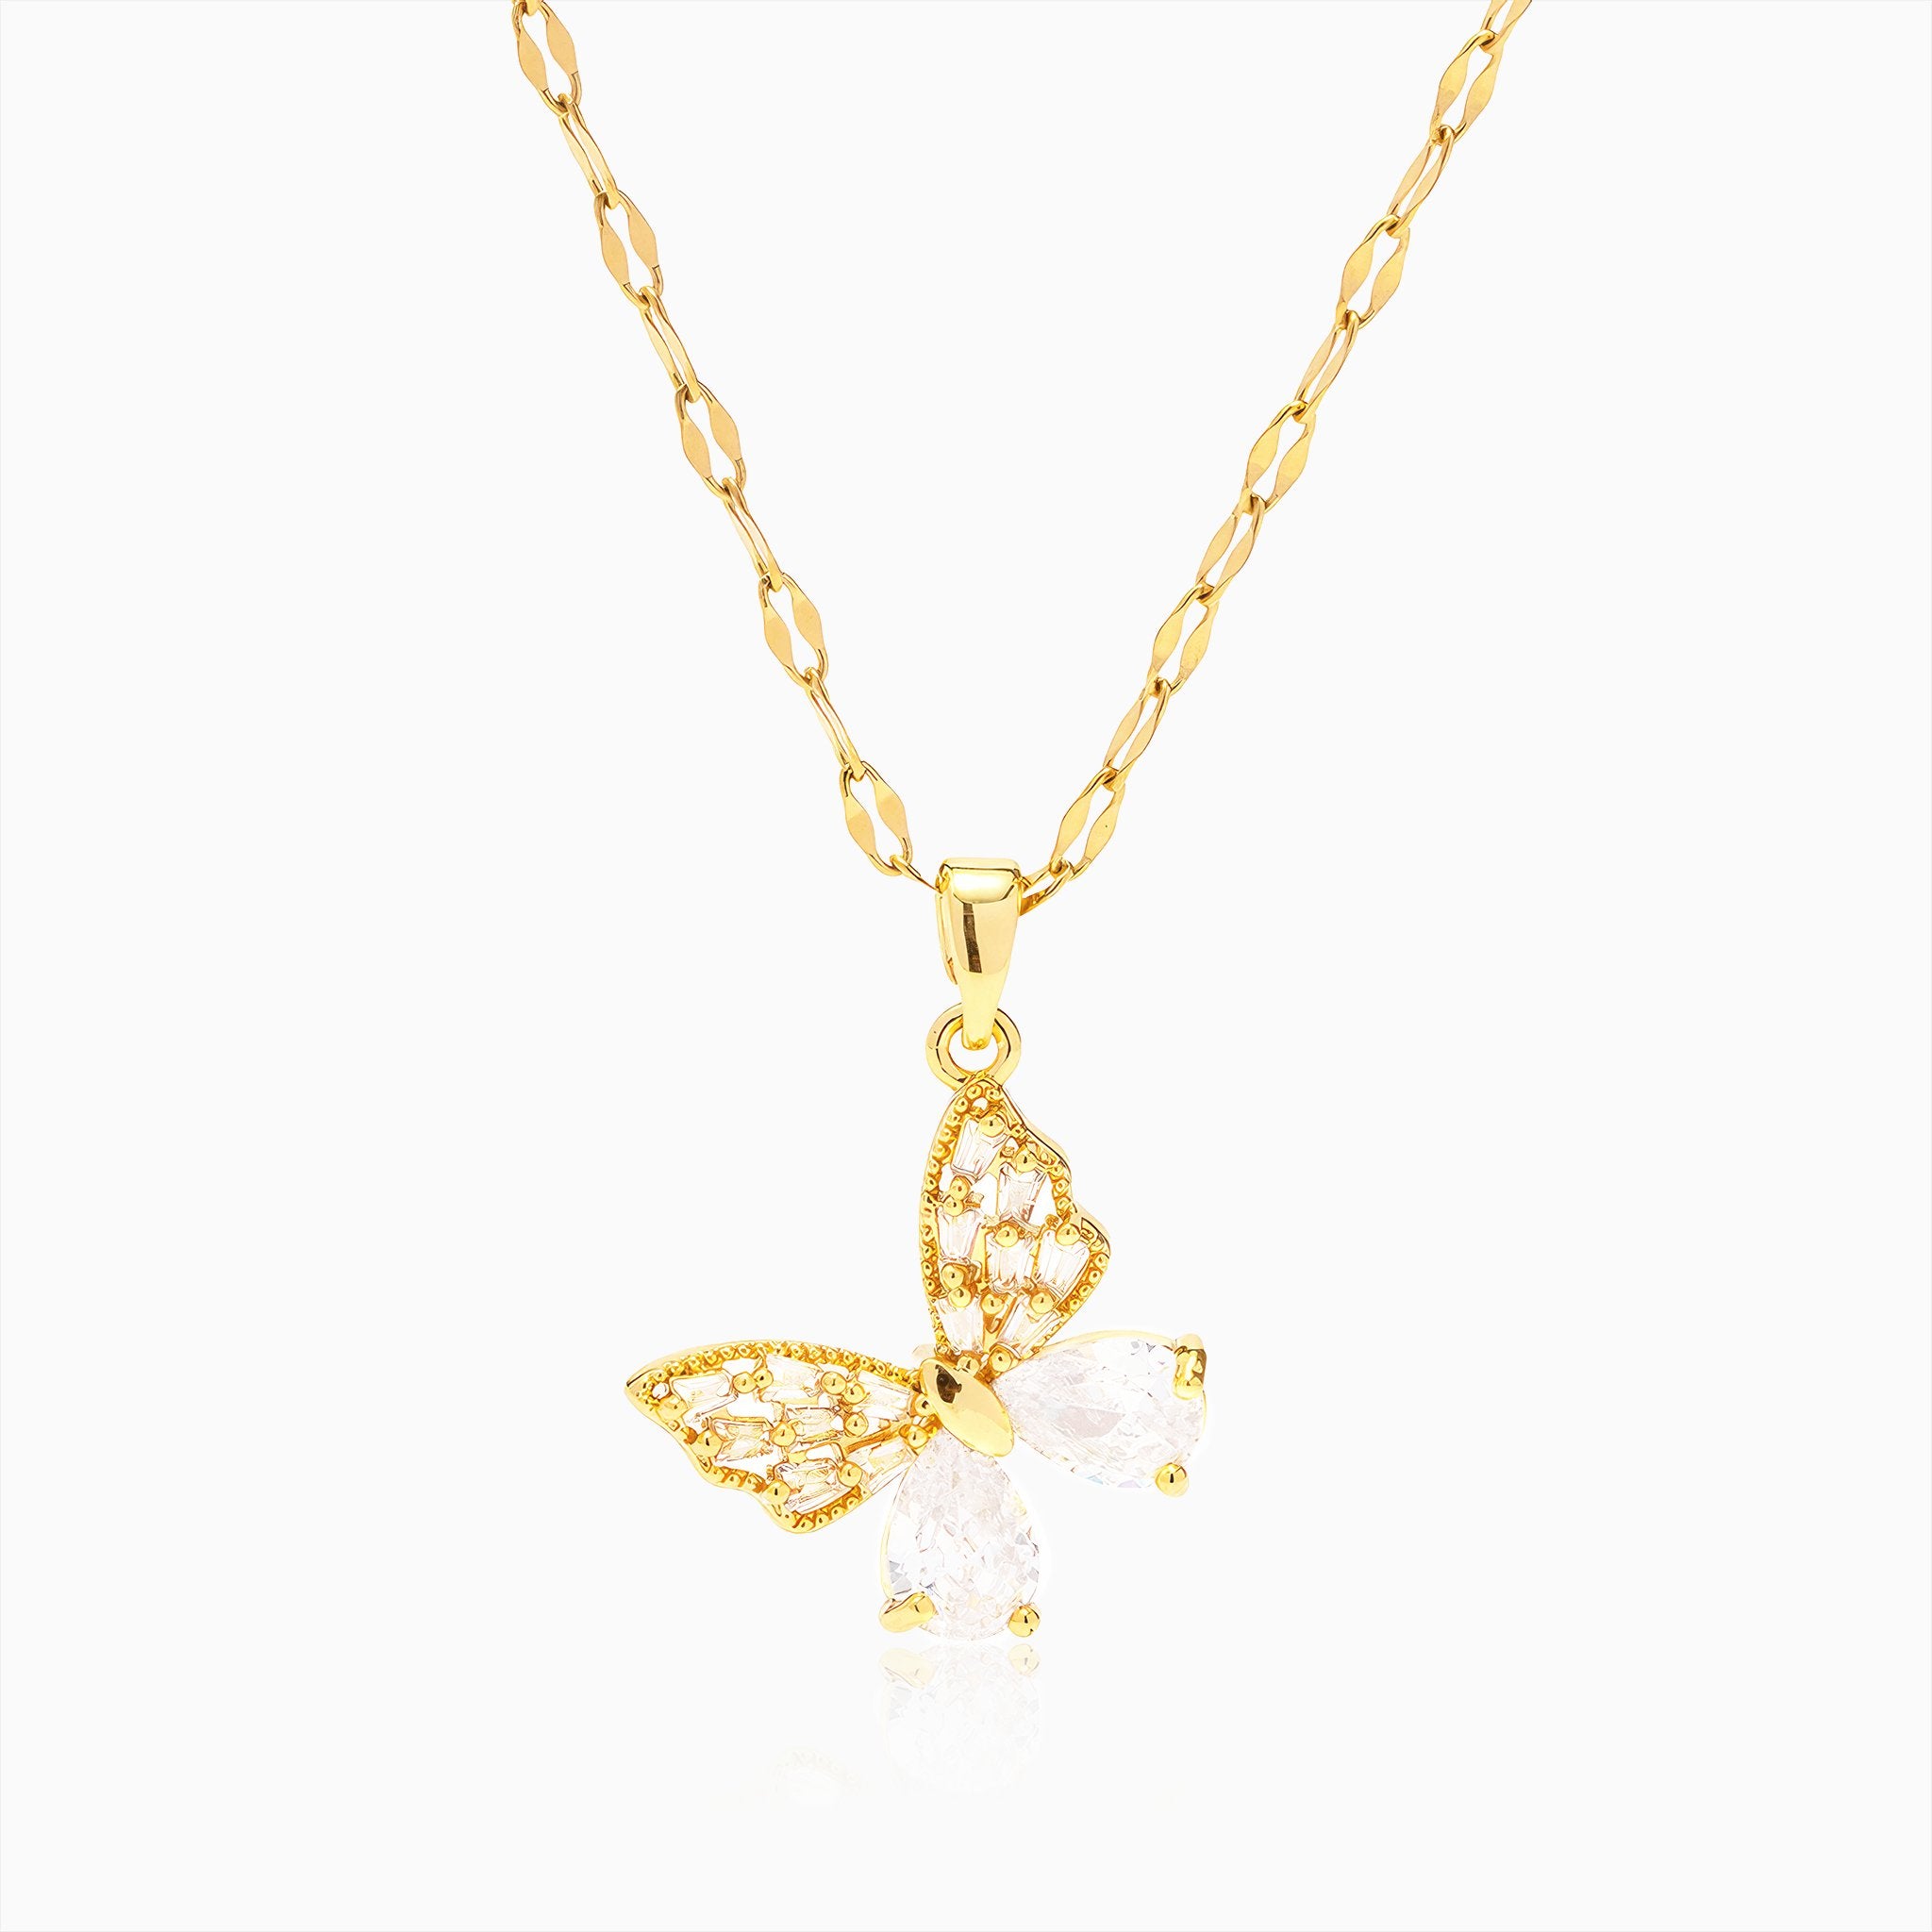 Butterfly Design Pendant Necklace - Nobbier - Necklace - 18K Gold And Titanium PVD Coated Jewelry